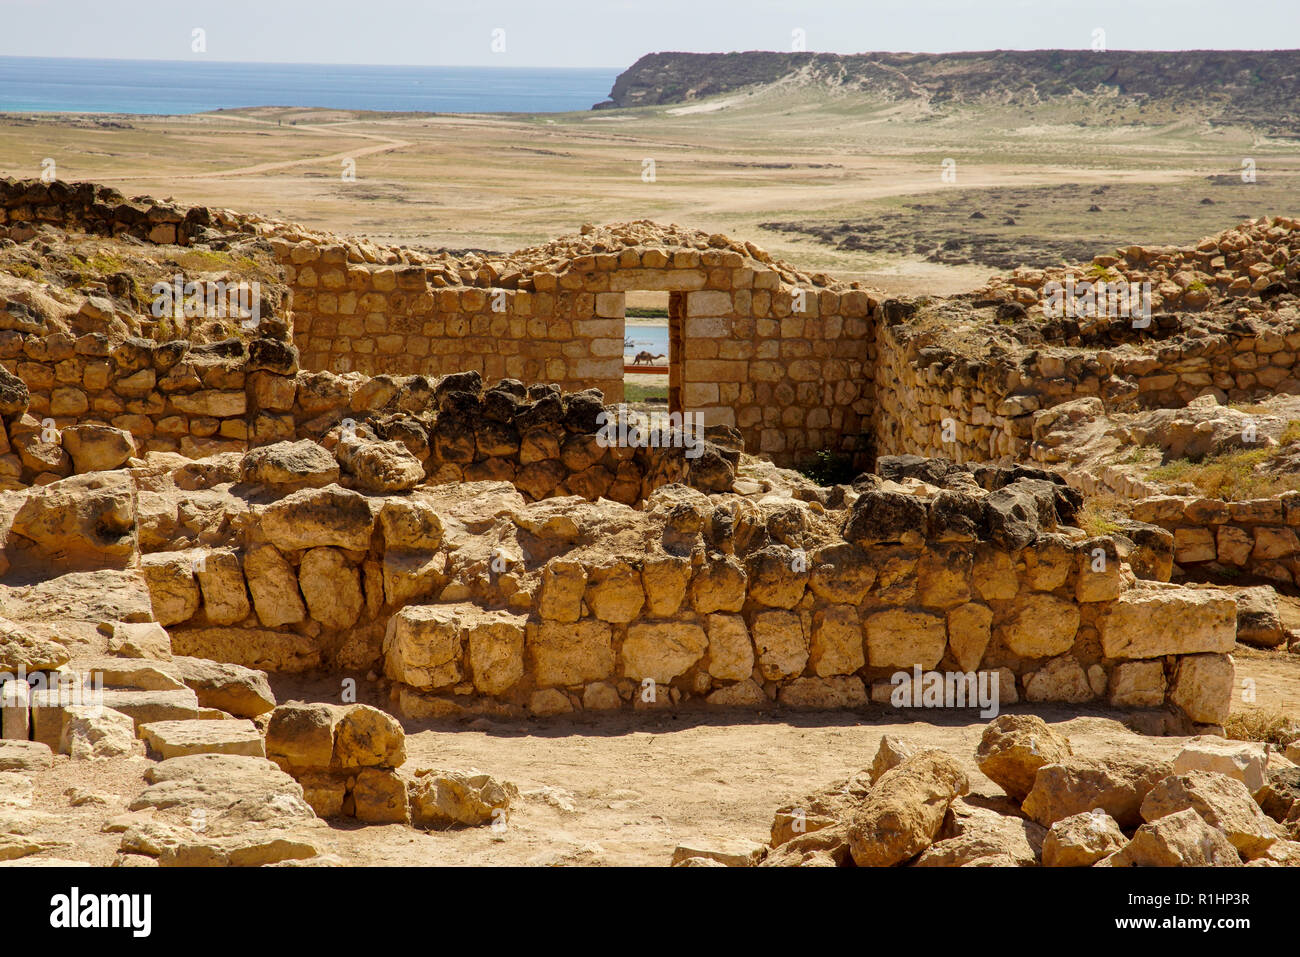 View of Sumhuram (the small fortified town), an South Arabian archaeological site near Taqah. The Dhofar region of Oman. Stock Photo